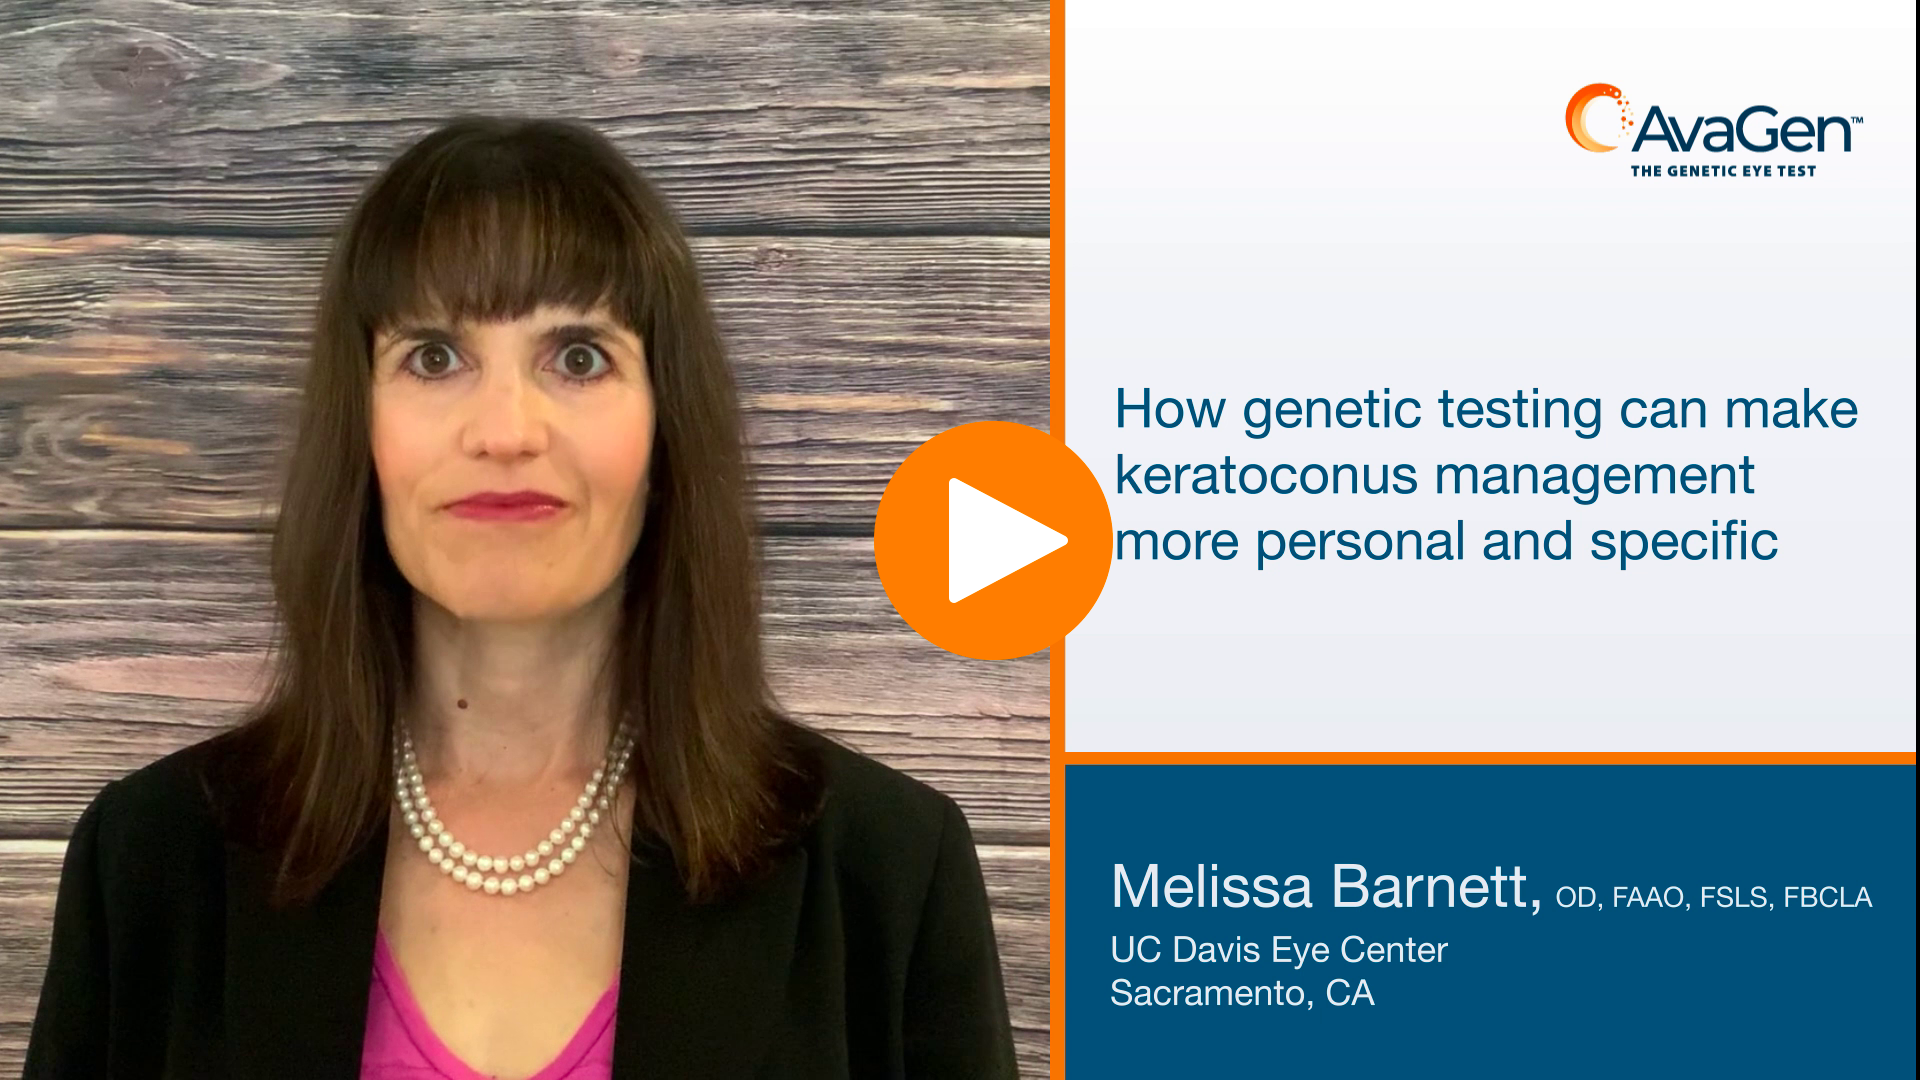 How genetic testing can make keratoconus management more personal and specific